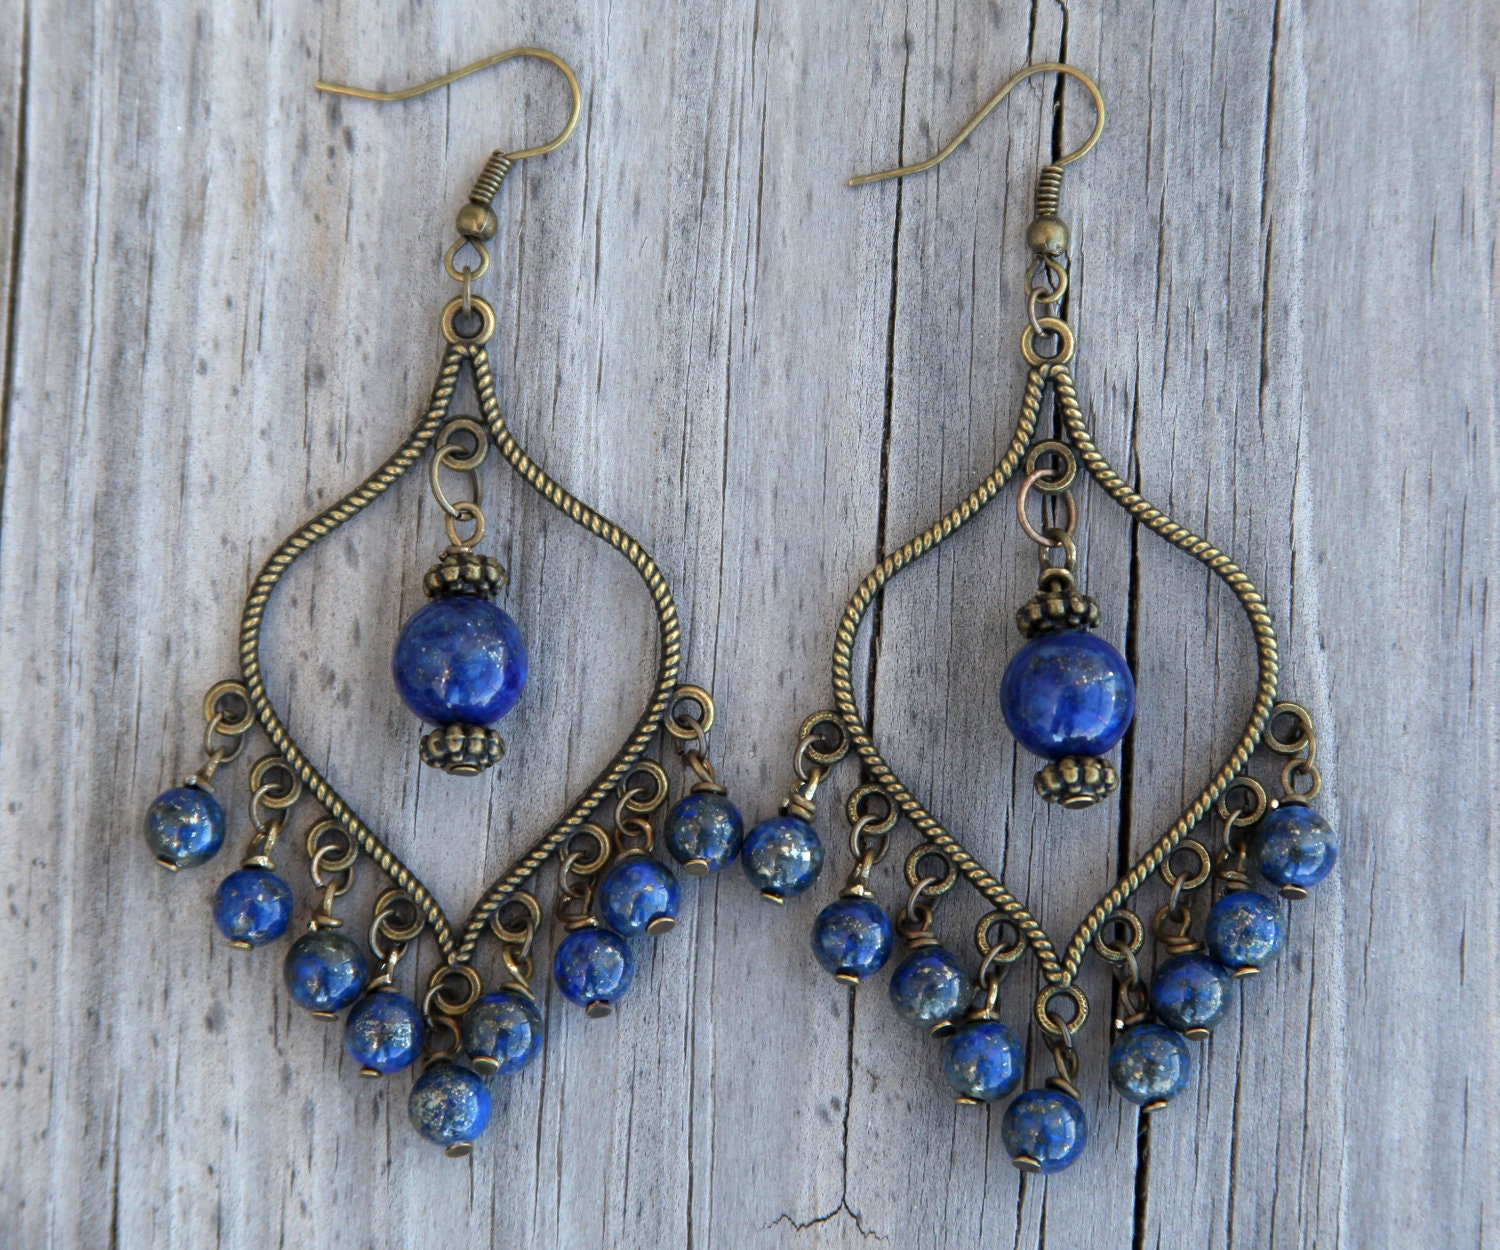 Handmade Chandelier Earrings with Lapis Lazuli and Antiqued